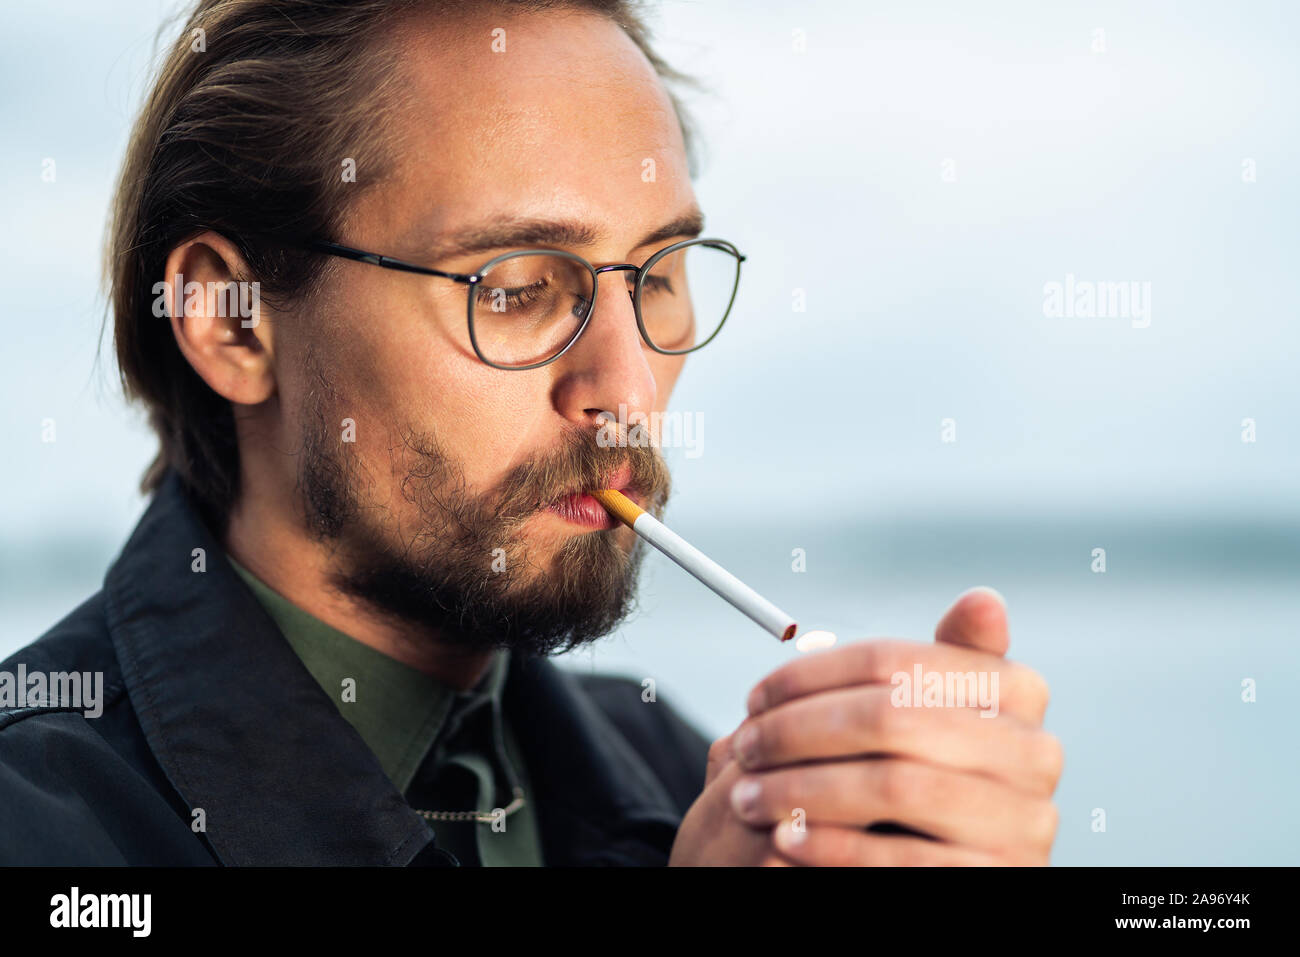 Photo of a young man lighting up a cigarrete Stock Photo